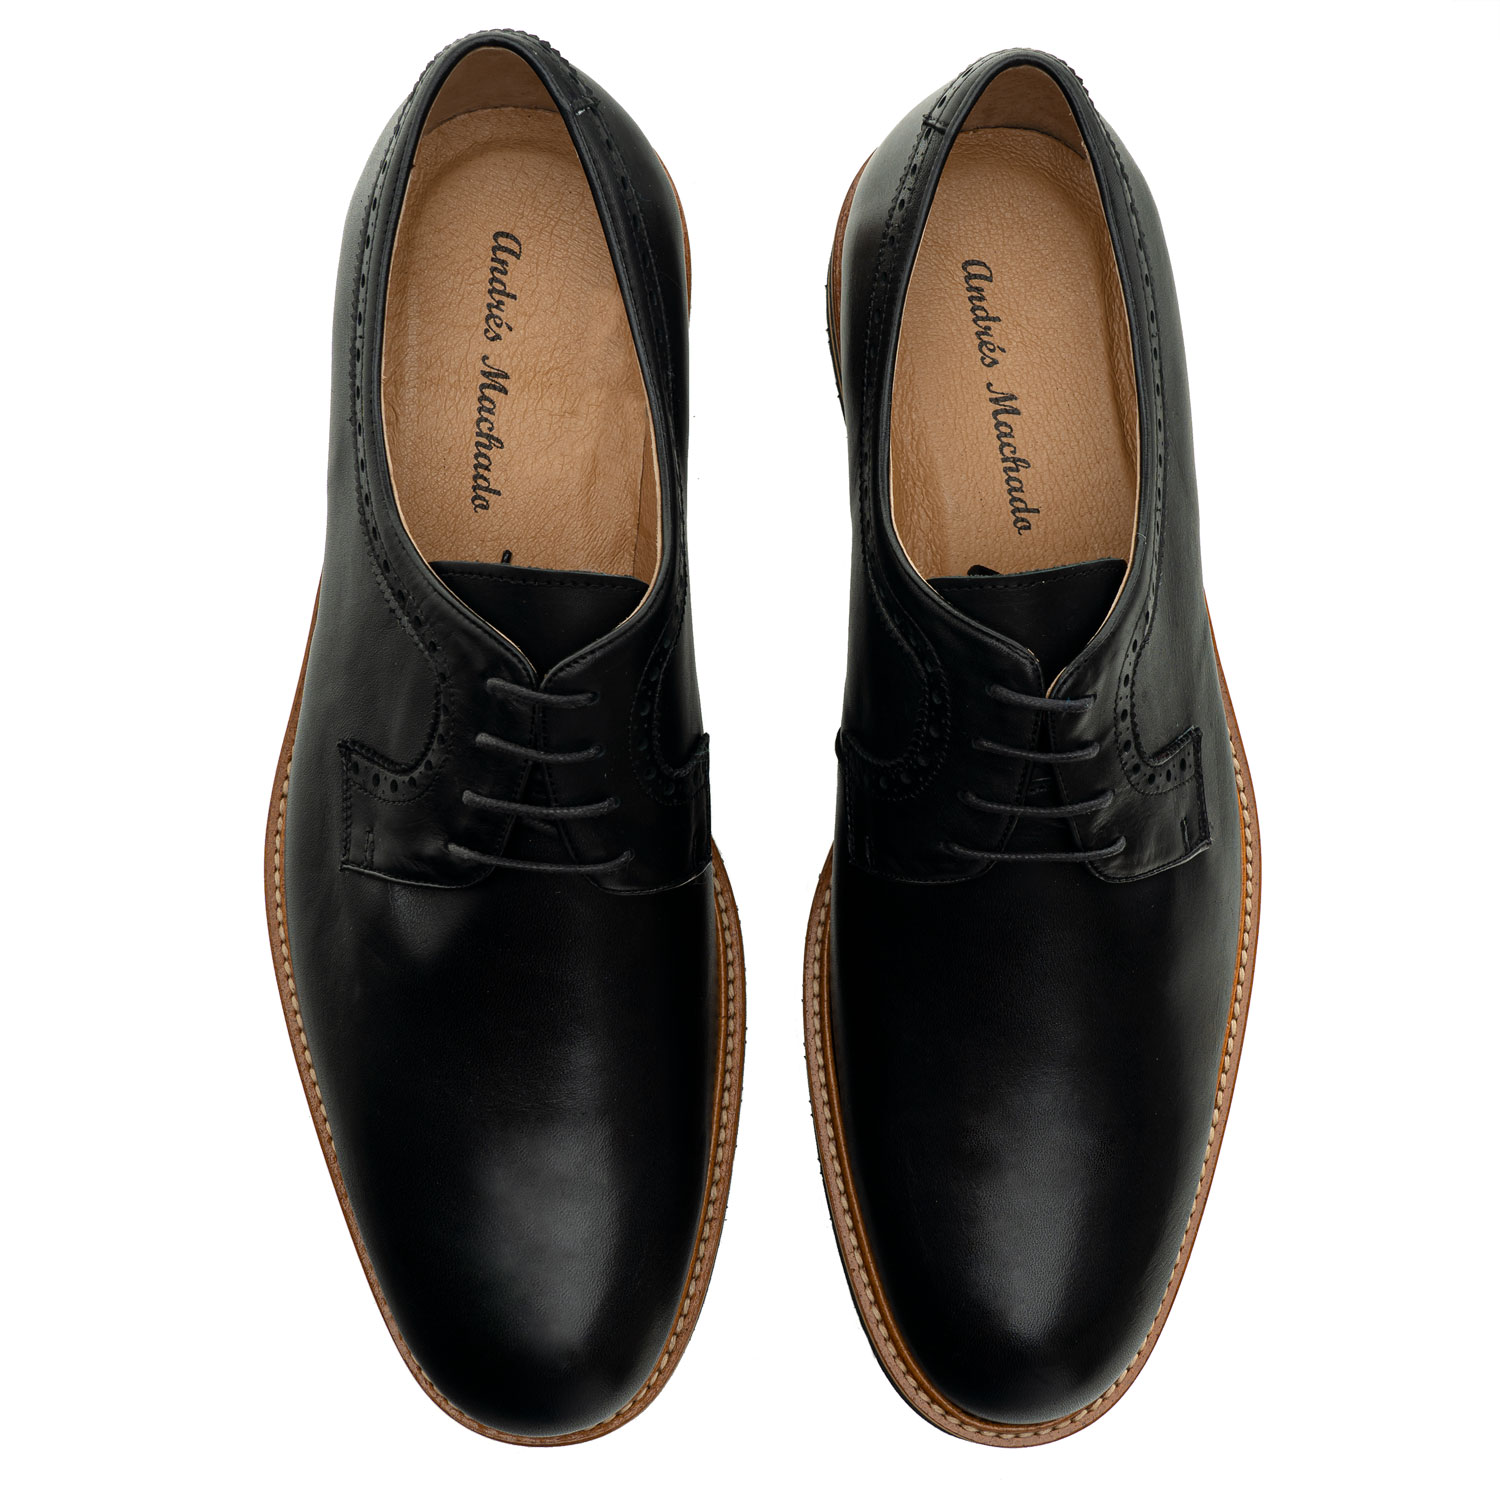 Oxford Shoes in Black Leather 